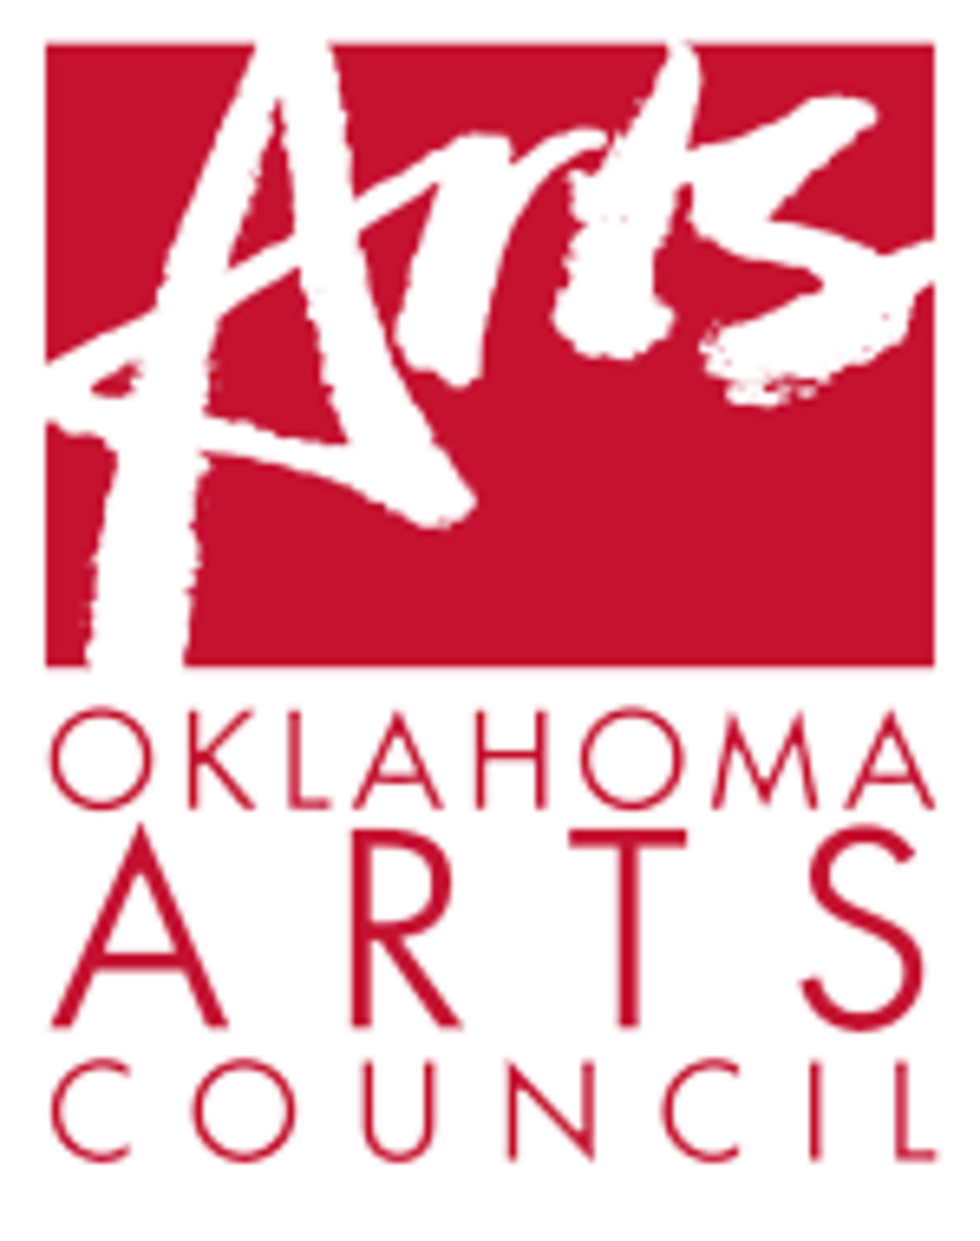 Celebrate The Arts in Lawton at the Arts For All Festival